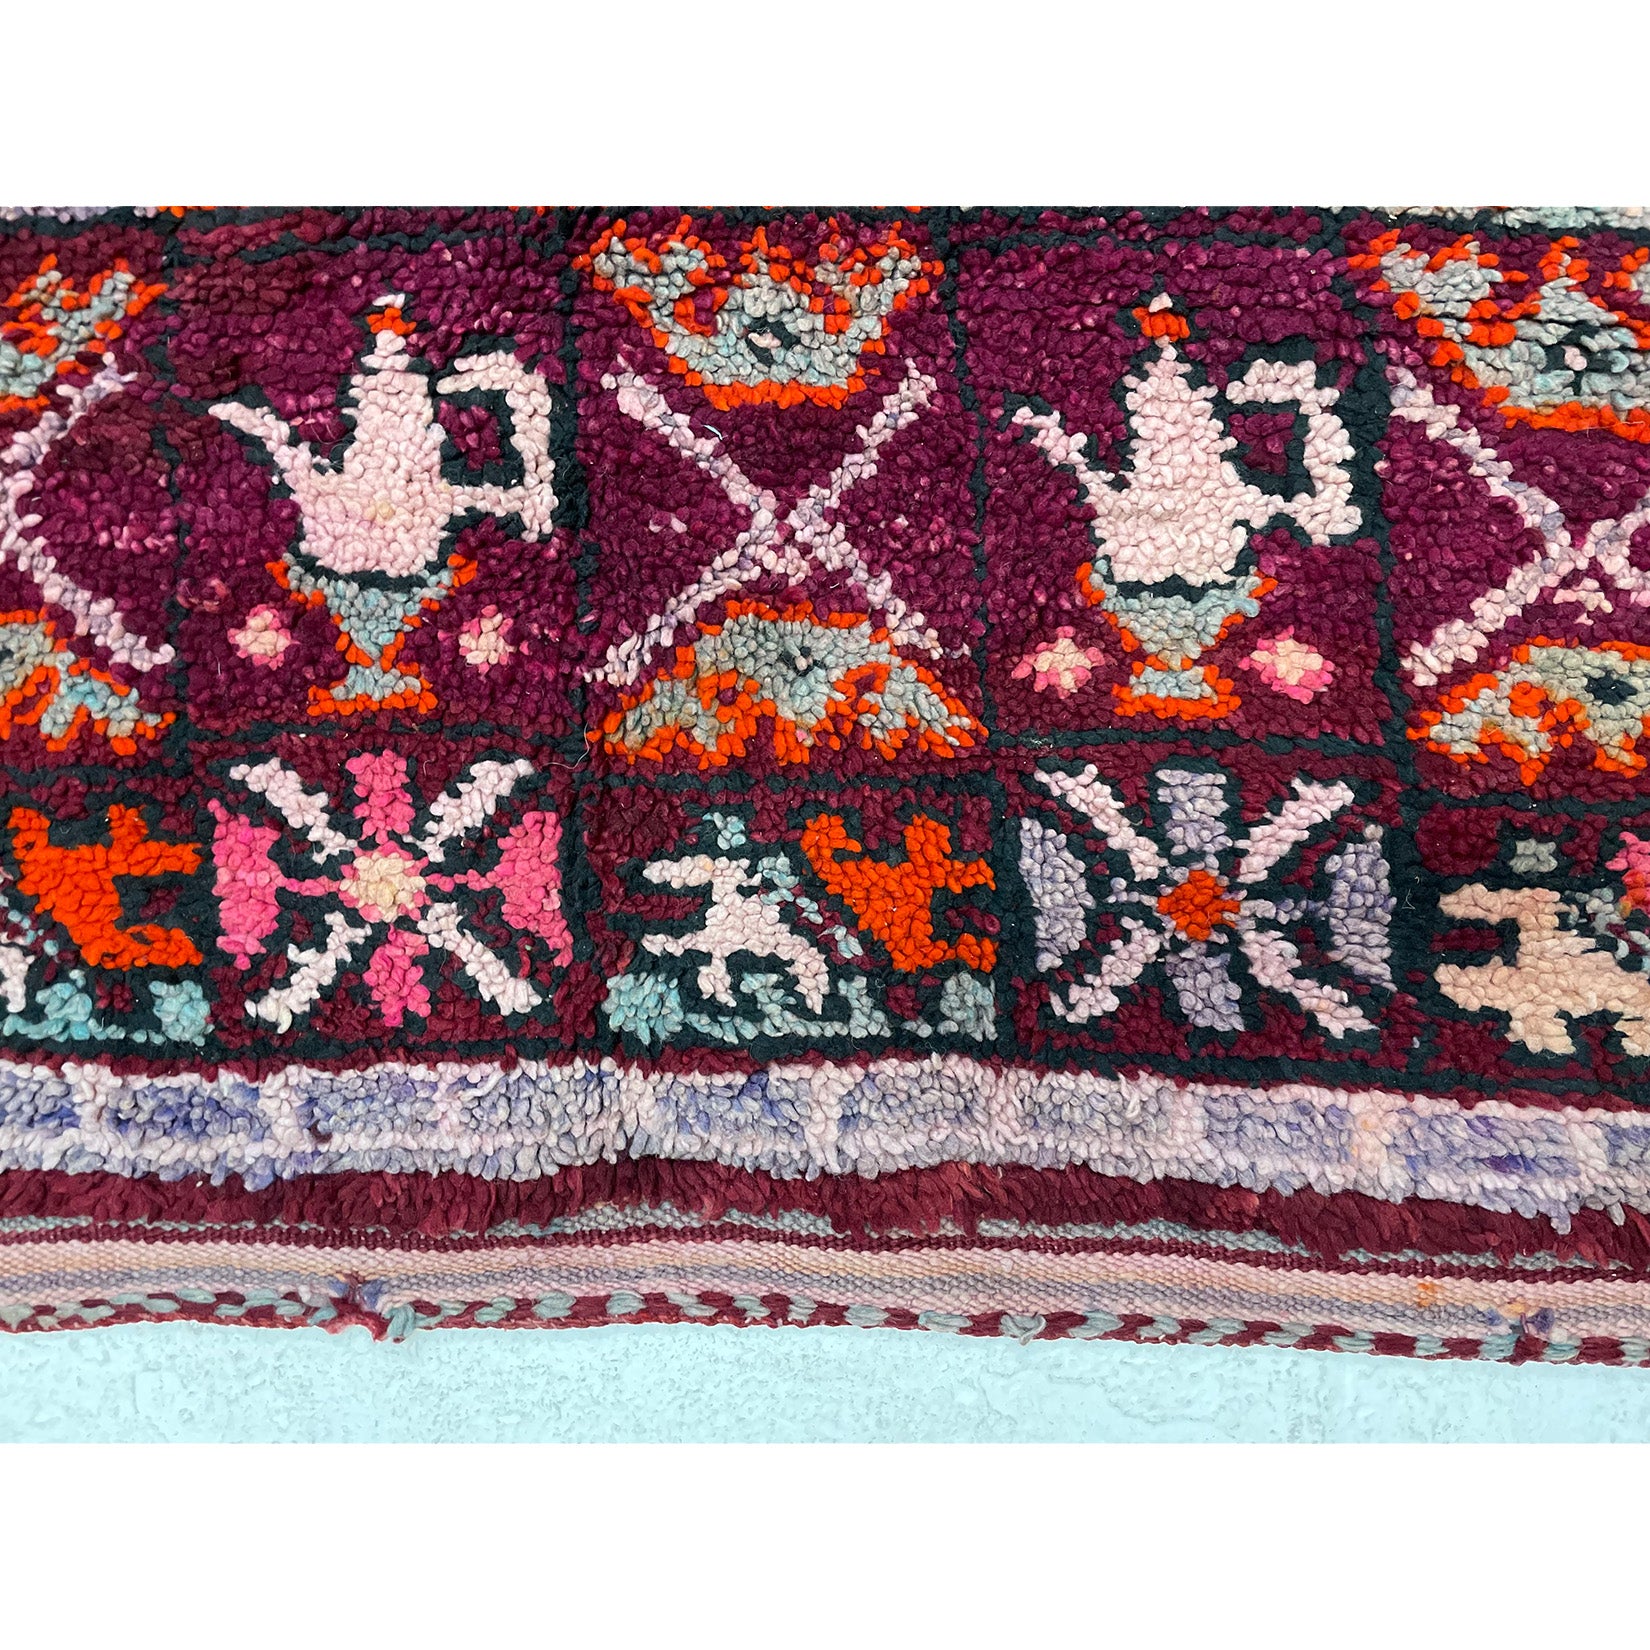 Handwoven pink and purple Moroccan area rug with tribal motifs - Kantara | Moroccan Rugs